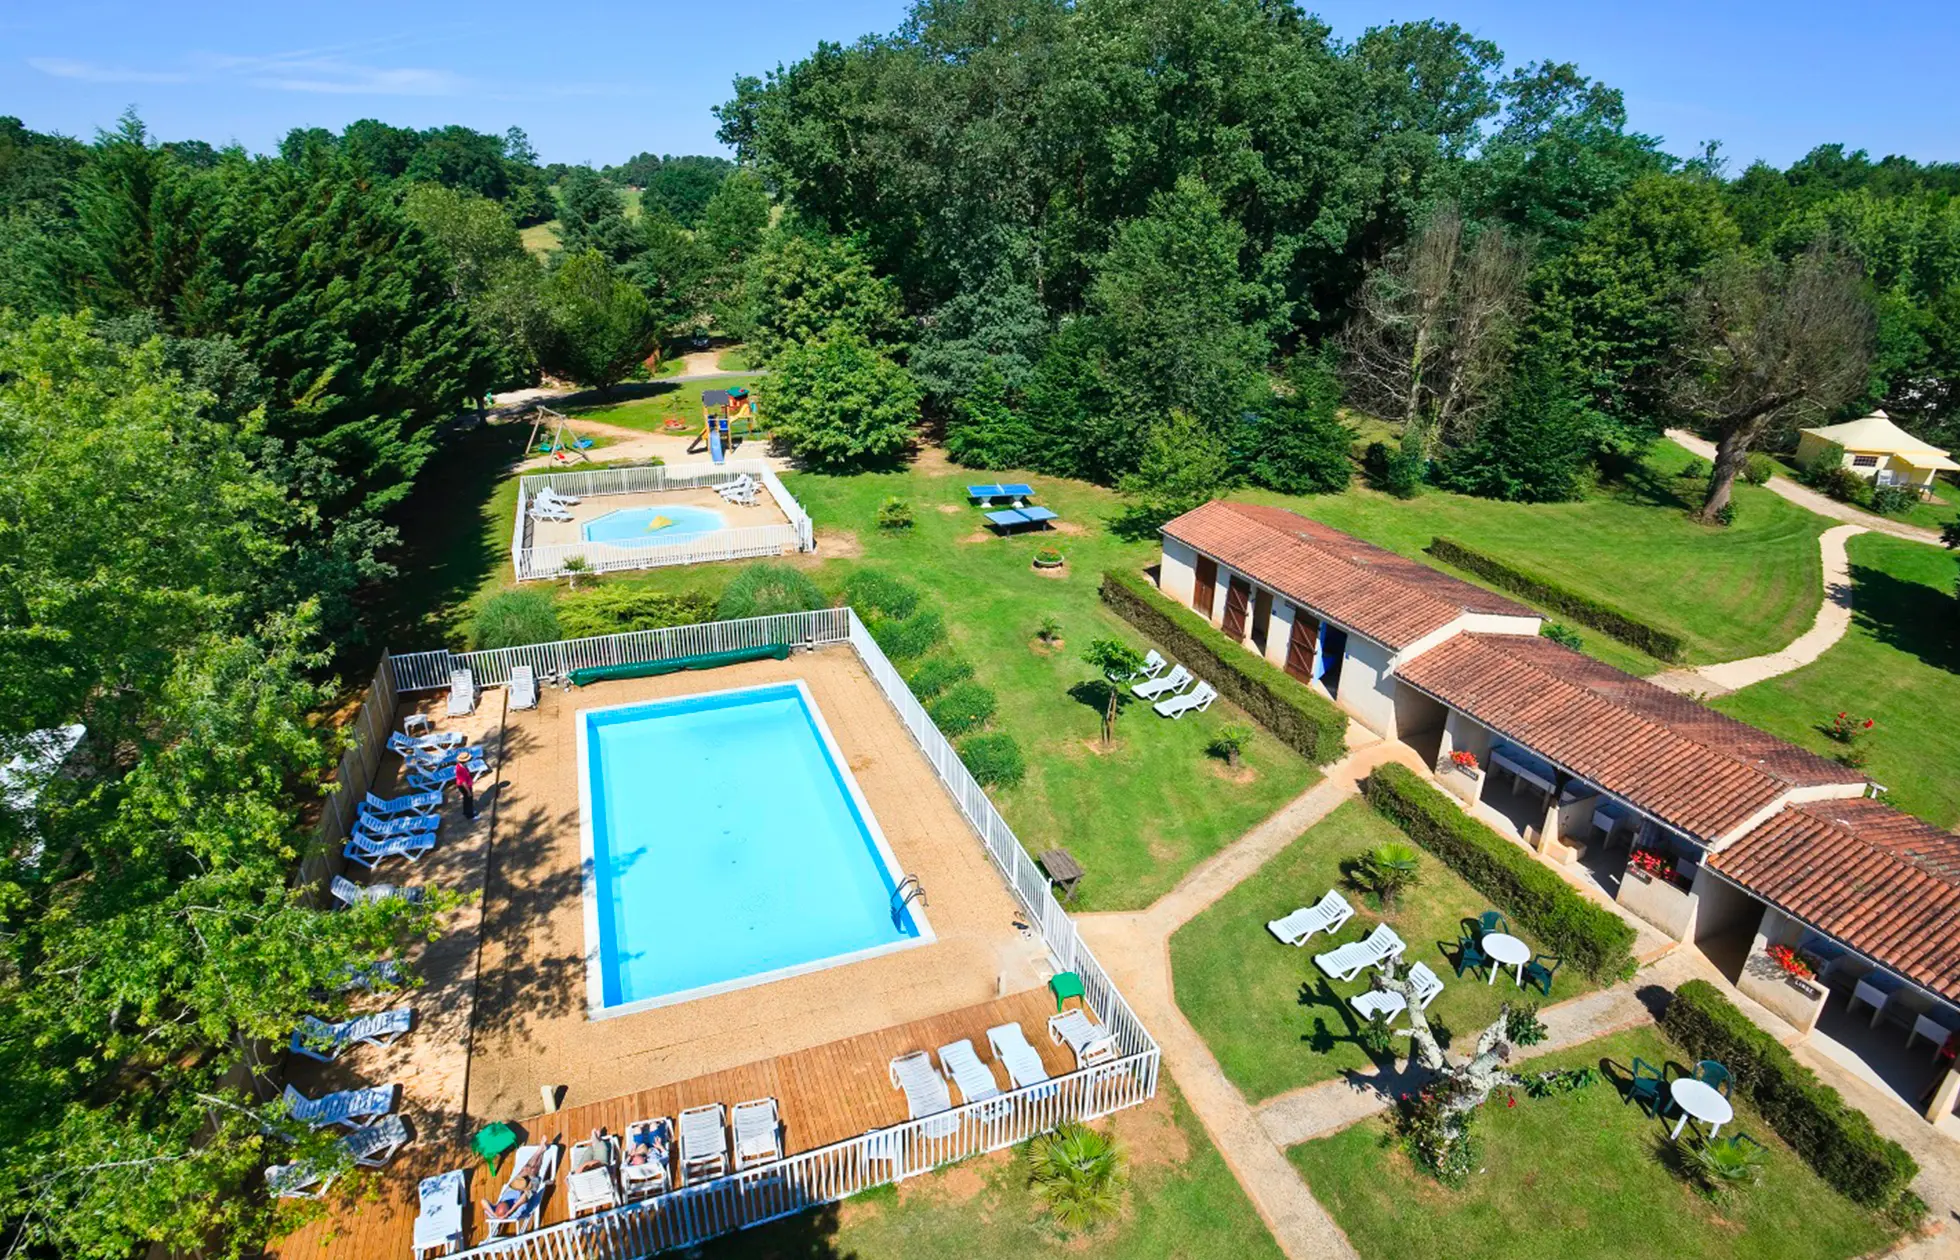 offer ' - '01 - Camping Les Nauves - Situation